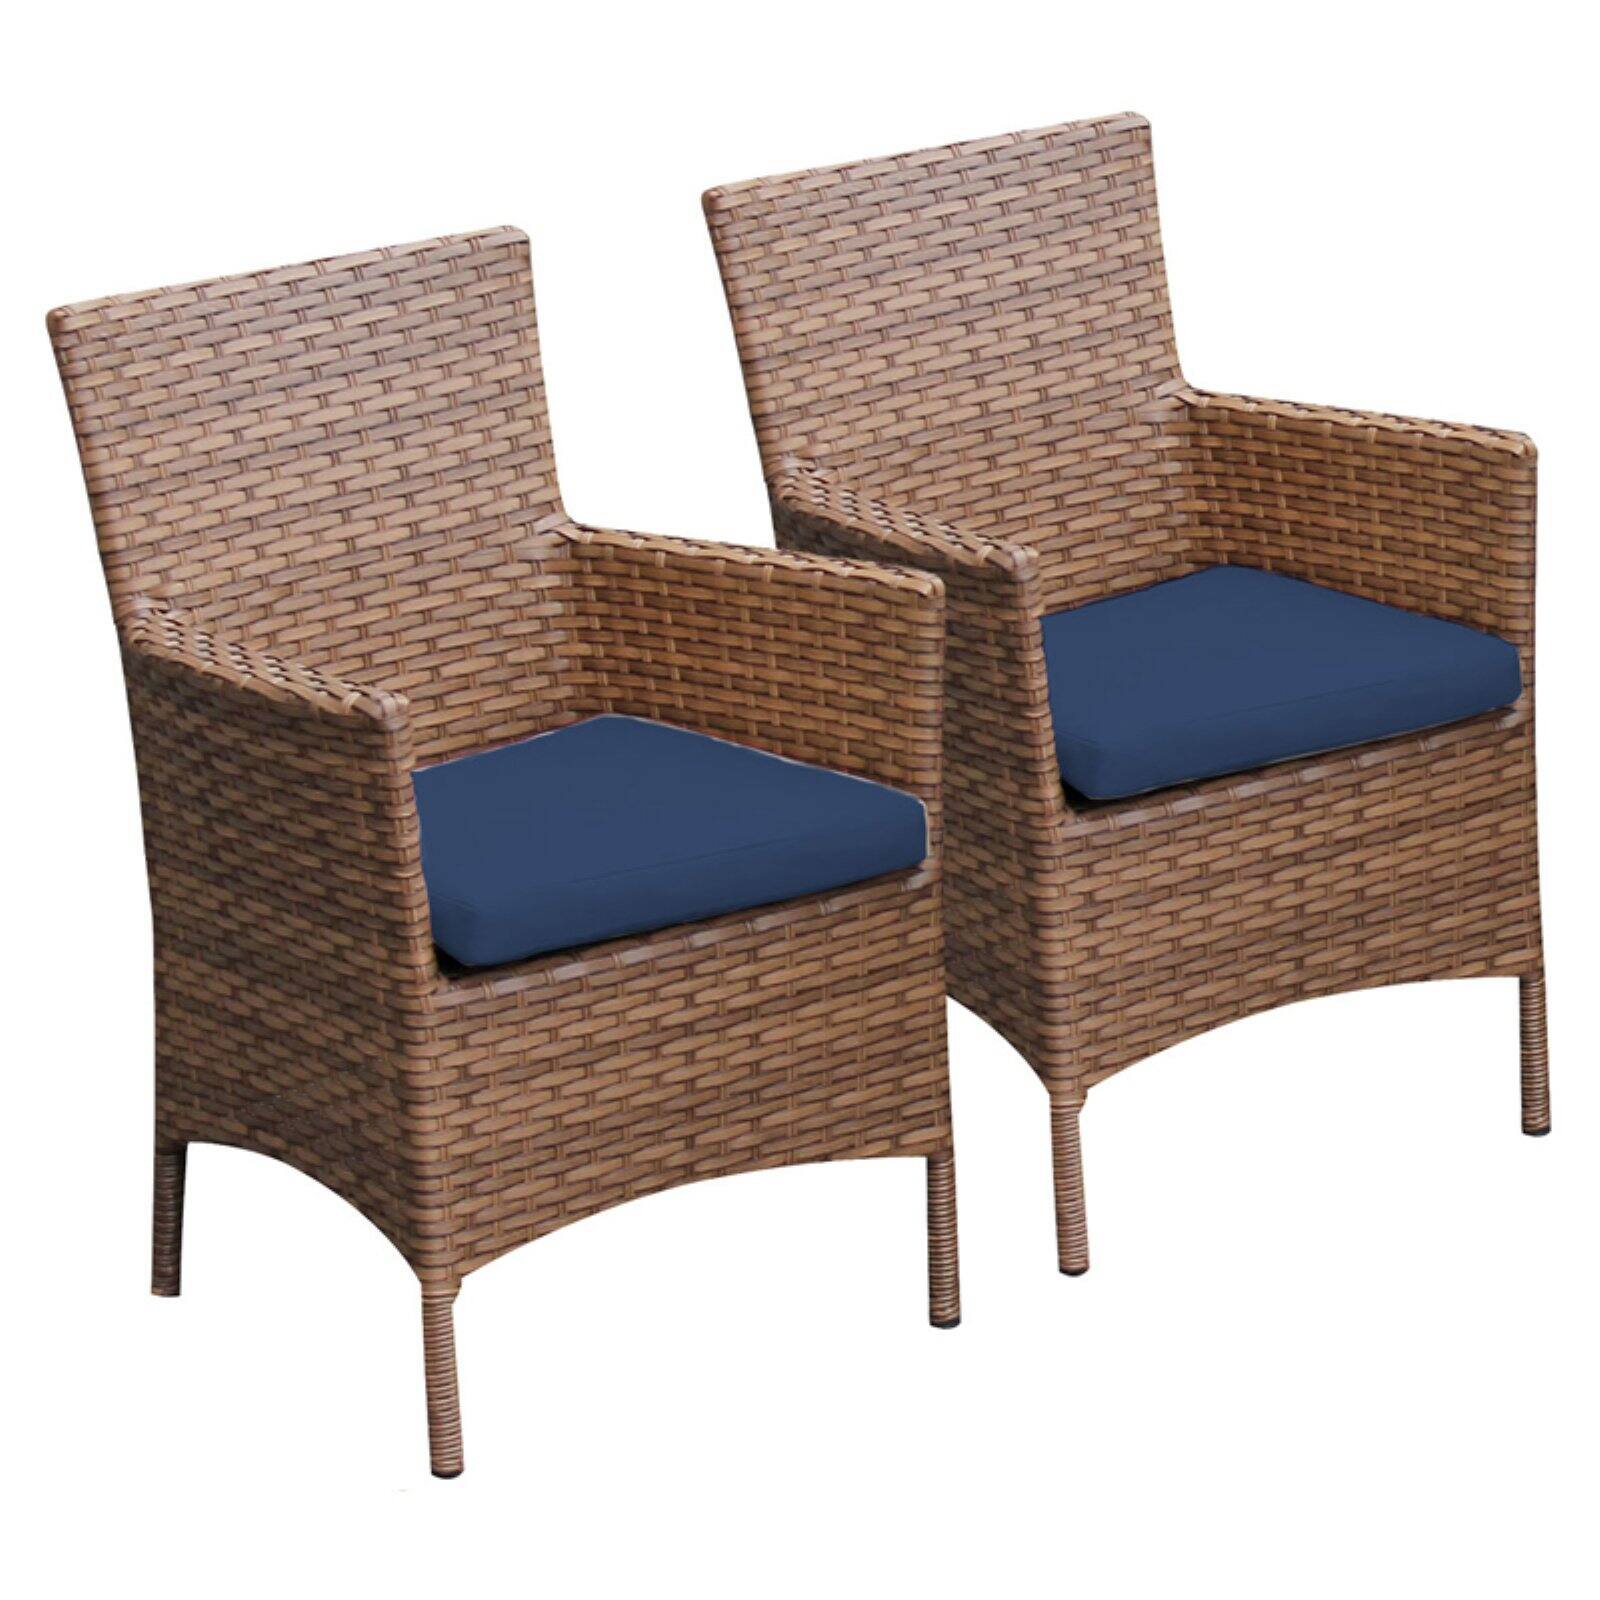 2 Laguna Dining Chairs With Arms-Color:Navy - image 1 of 2